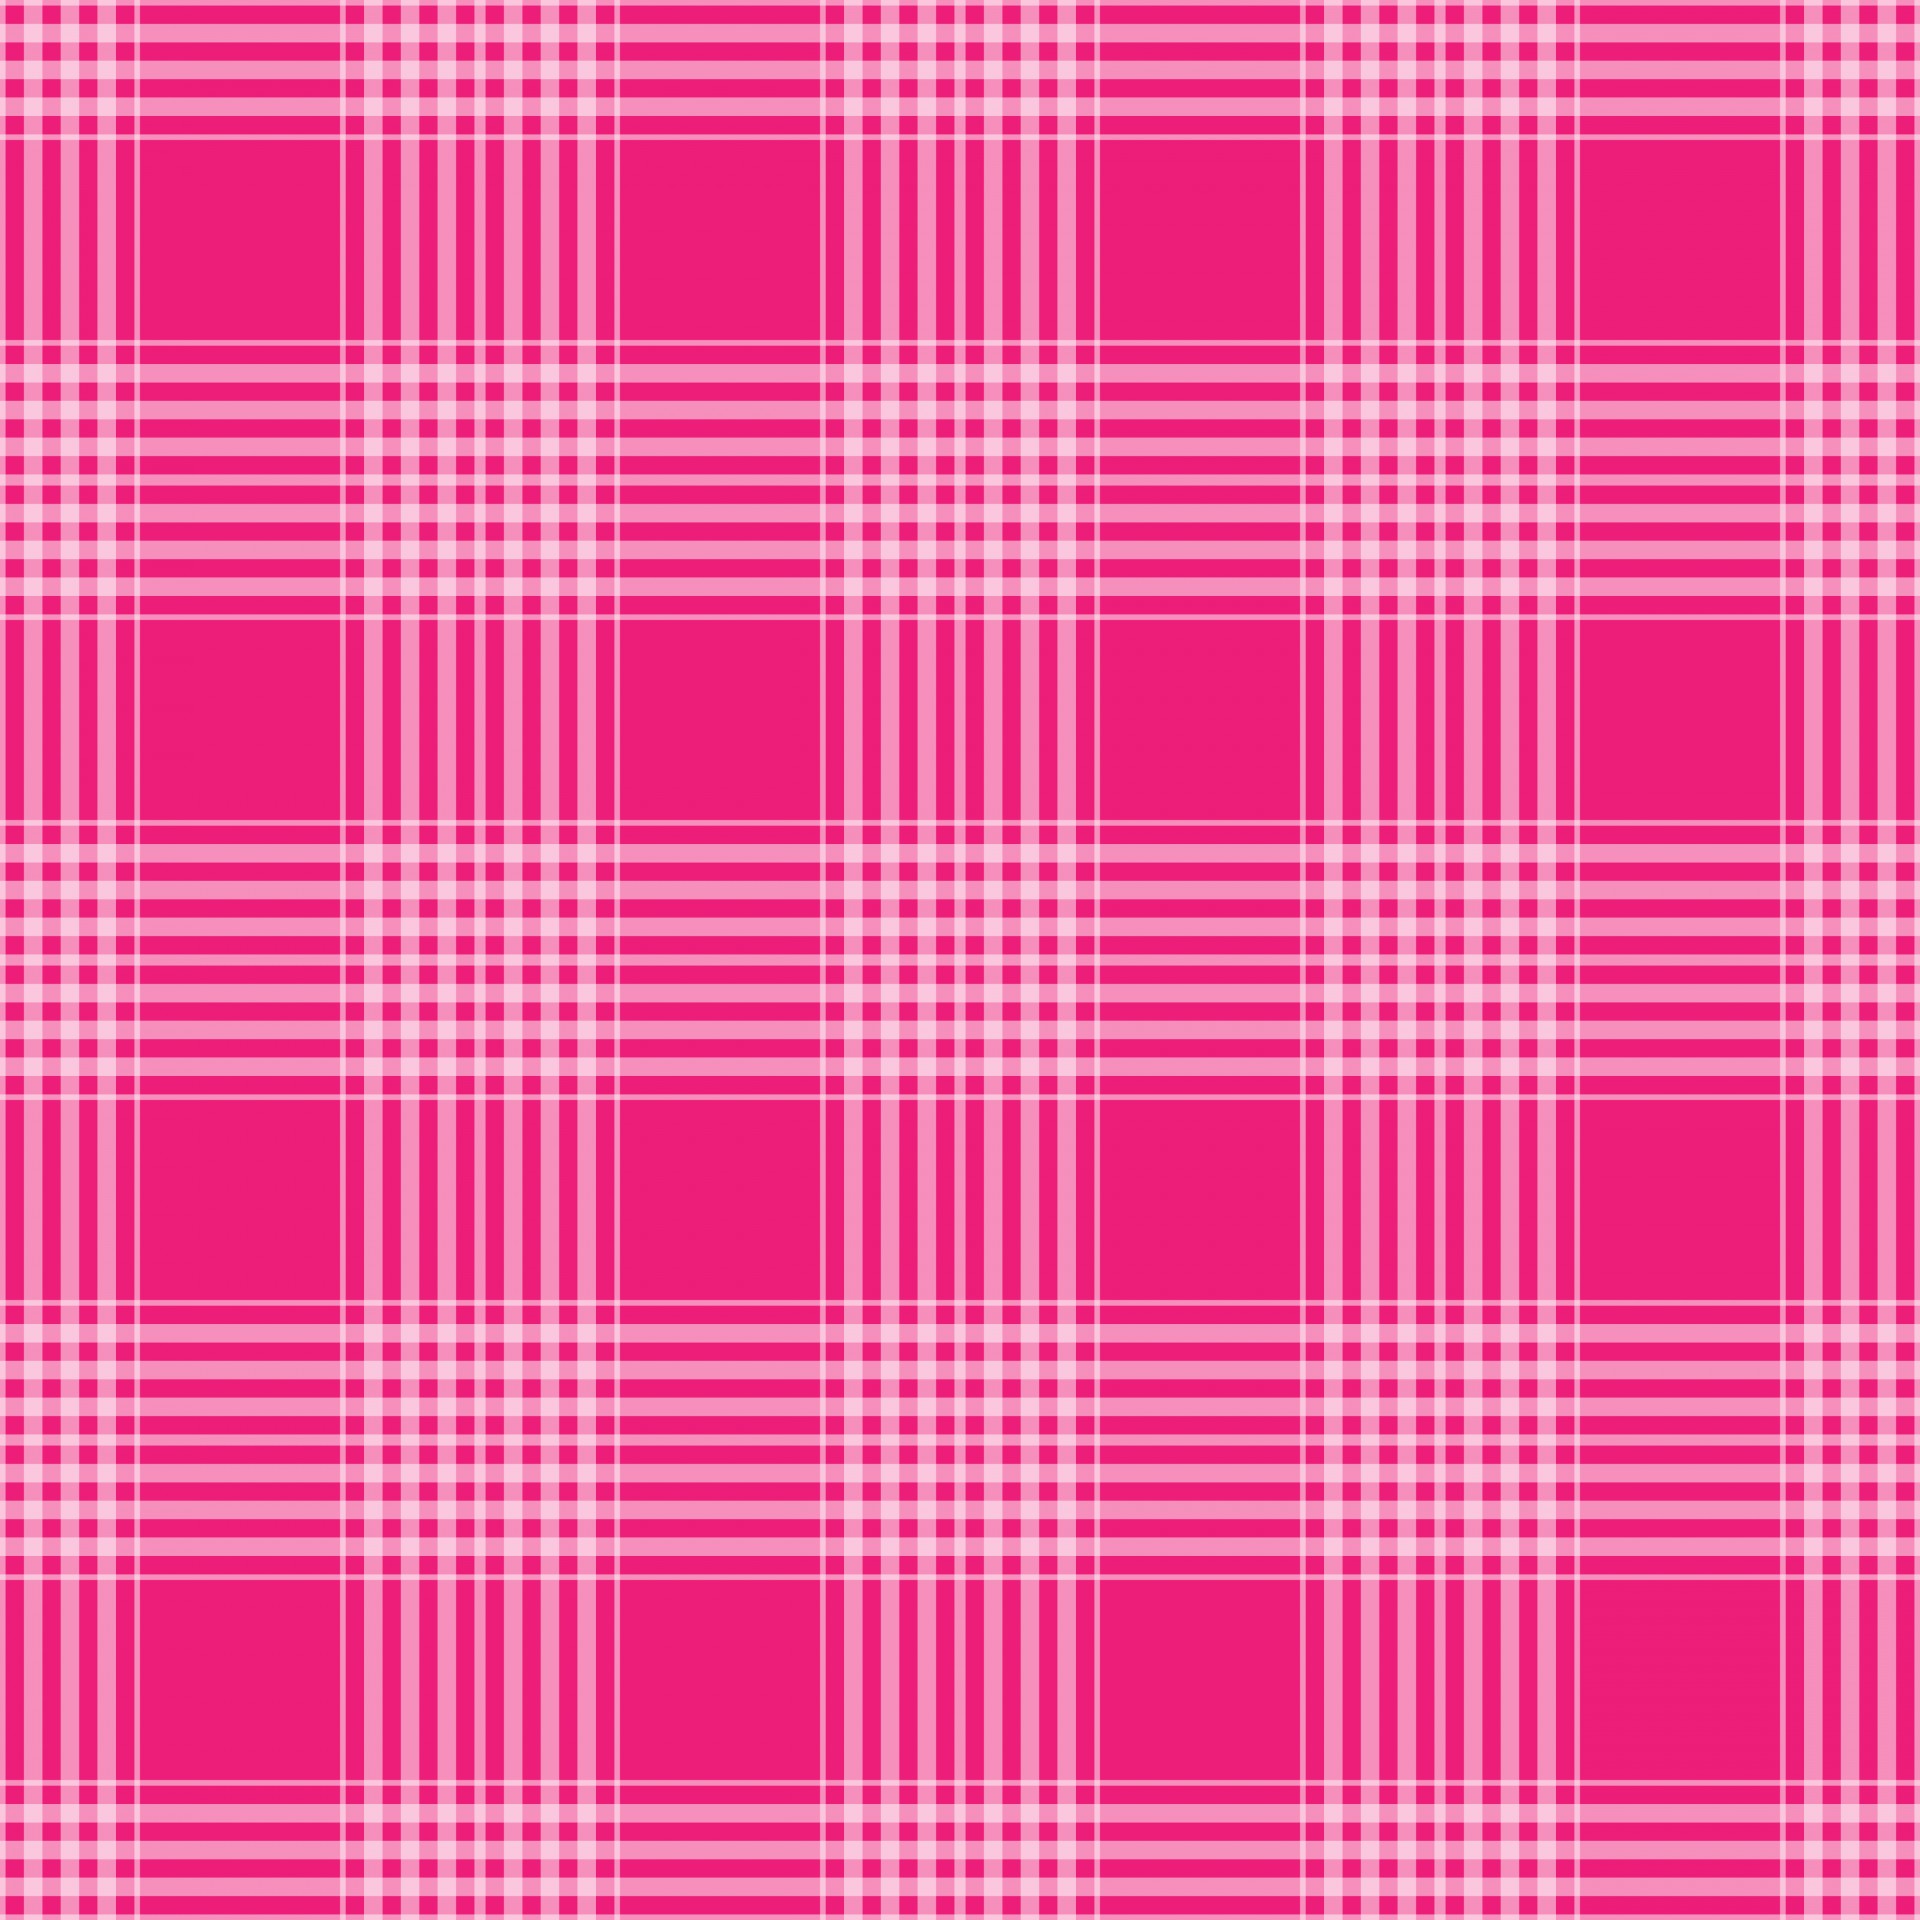 75393 Pink Checkered Background Images Stock Photos  Vectors   Shutterstock